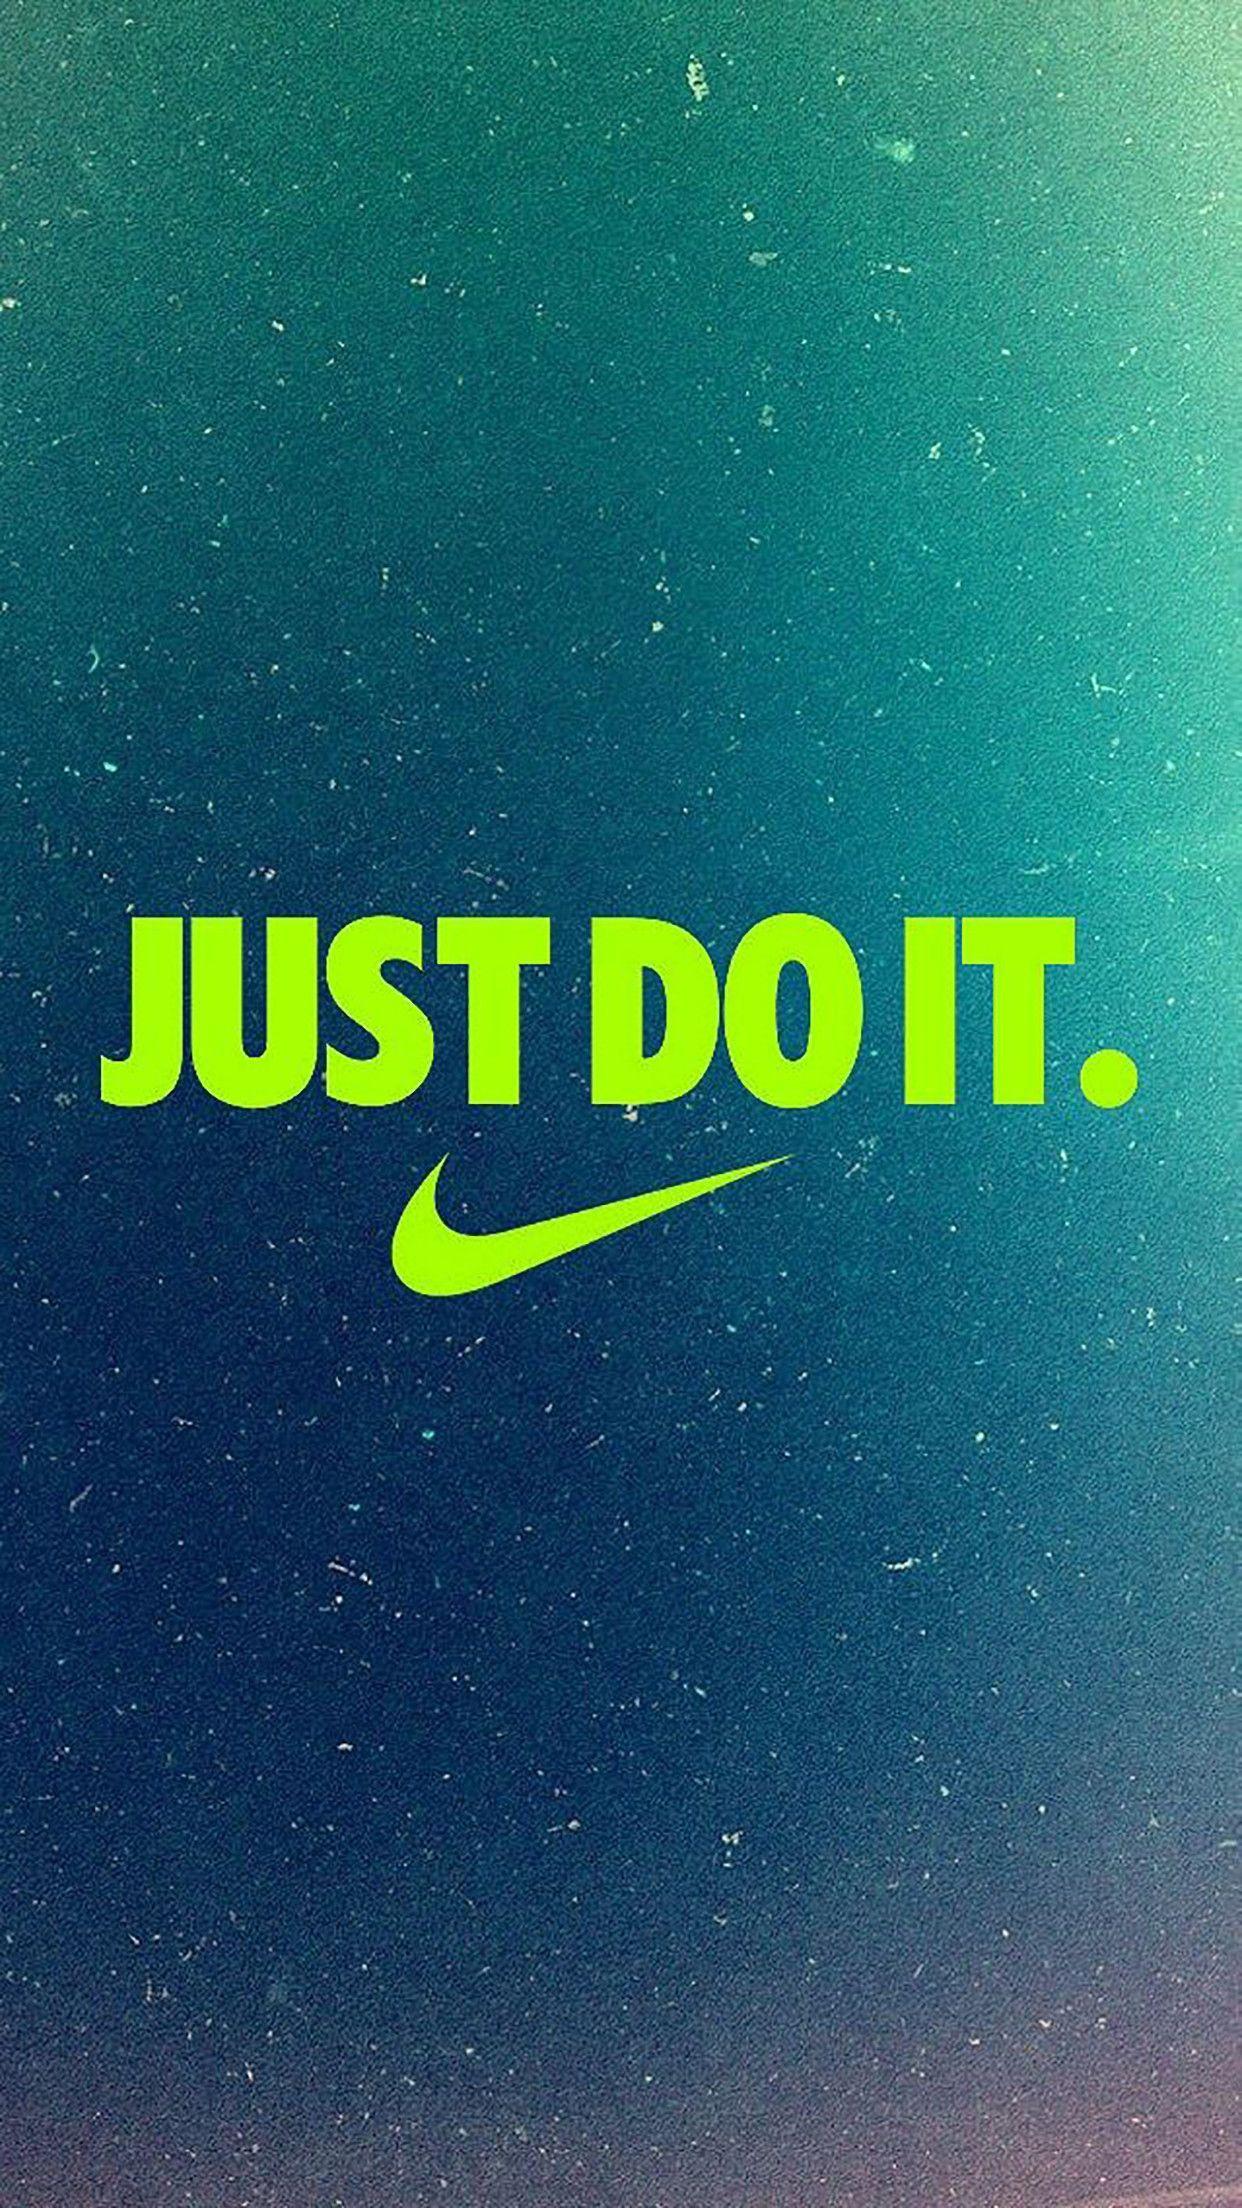 Nike Just Do It Logo Wallpapers Wallpaper Cave